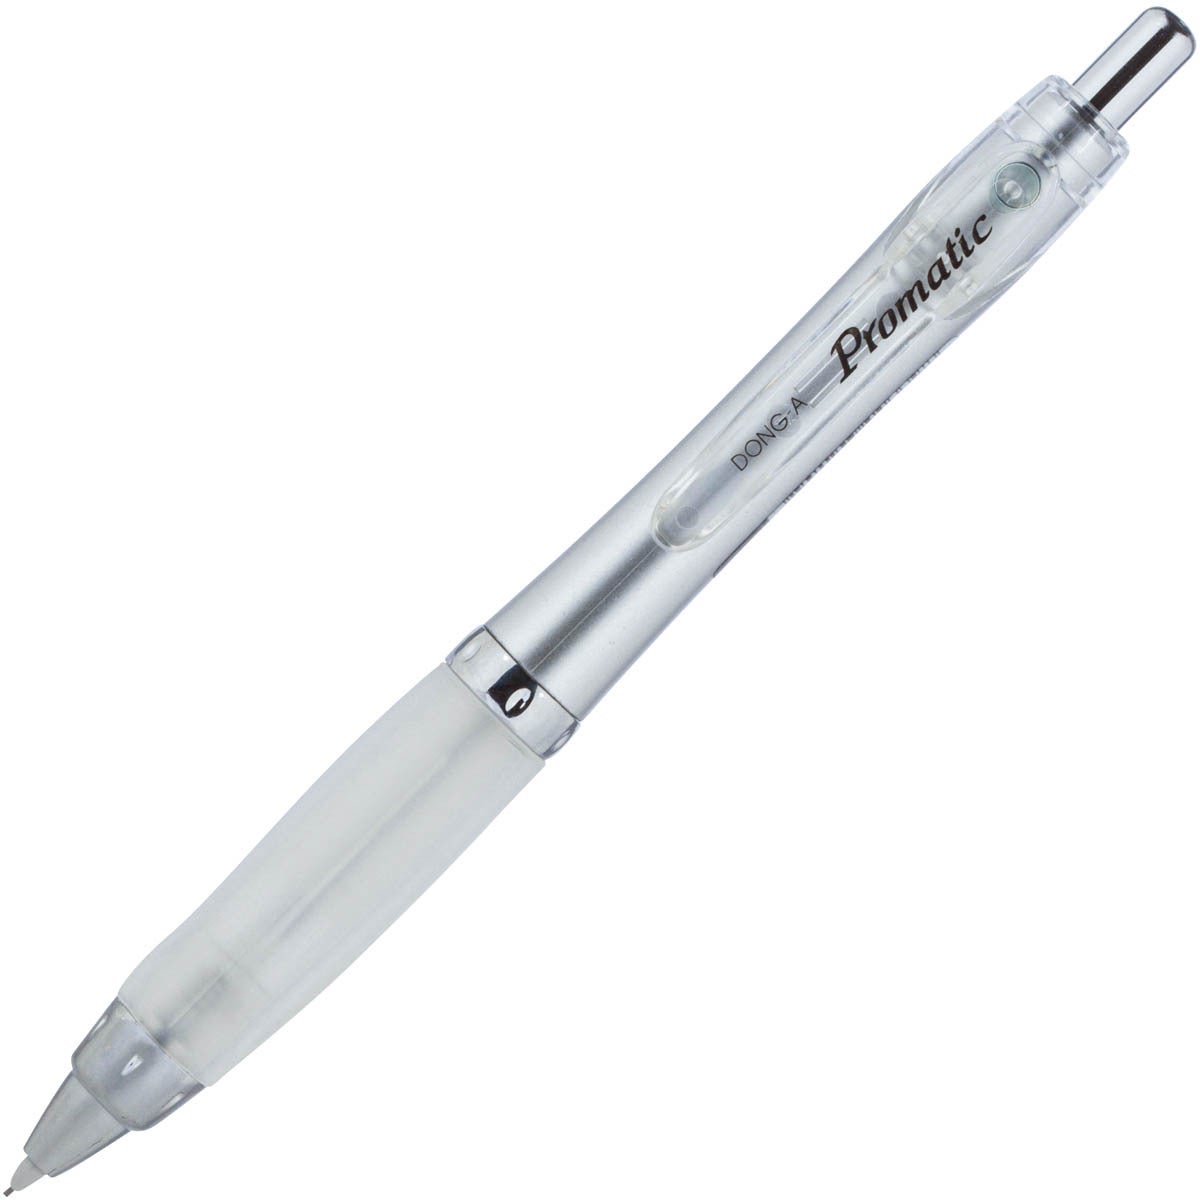 DONG-A Promatic Mechanical Pencil - White product image 2